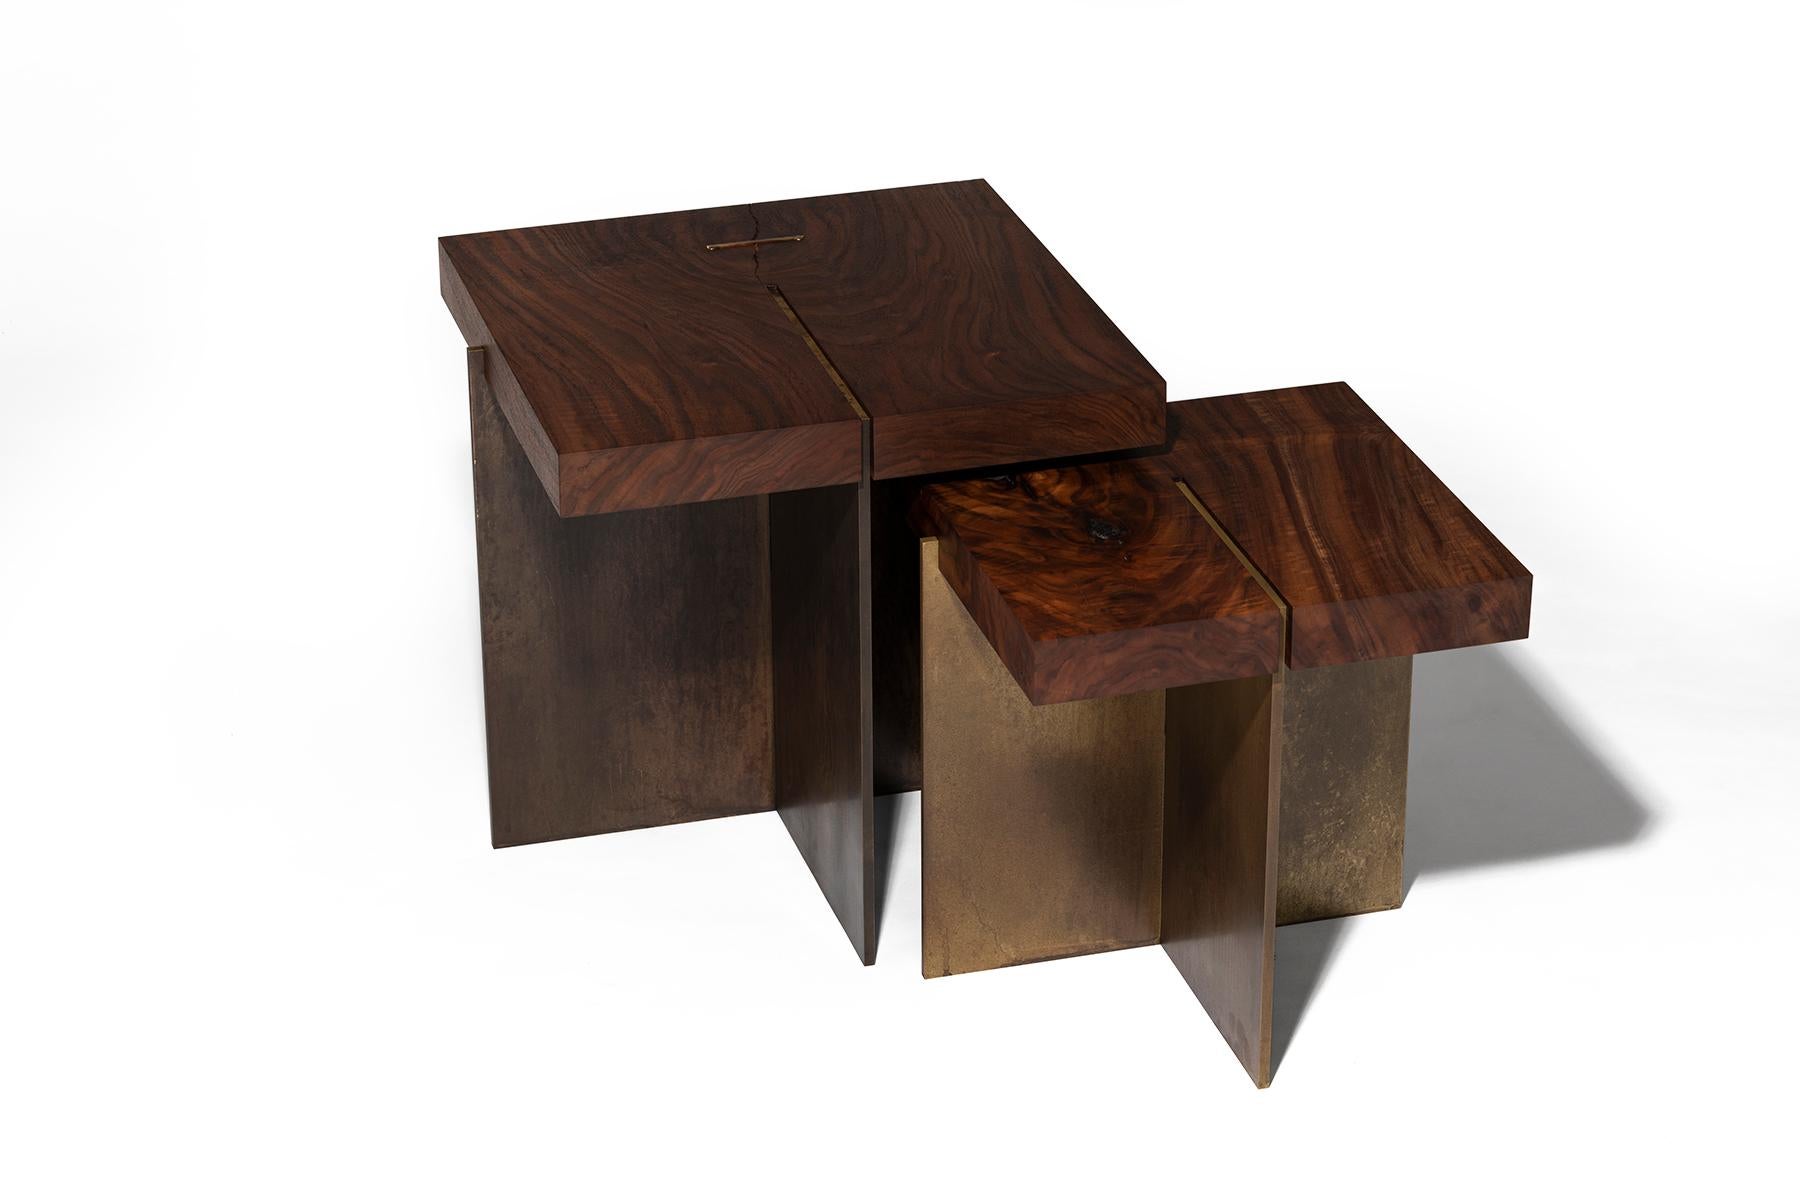 These simple yet handsome Cartesian nesting tables by Taylor Donsker feature an interlocking solid Walnut and hand aged solid brass base. Available in different sizes and materials, customizable. Shown in large (20